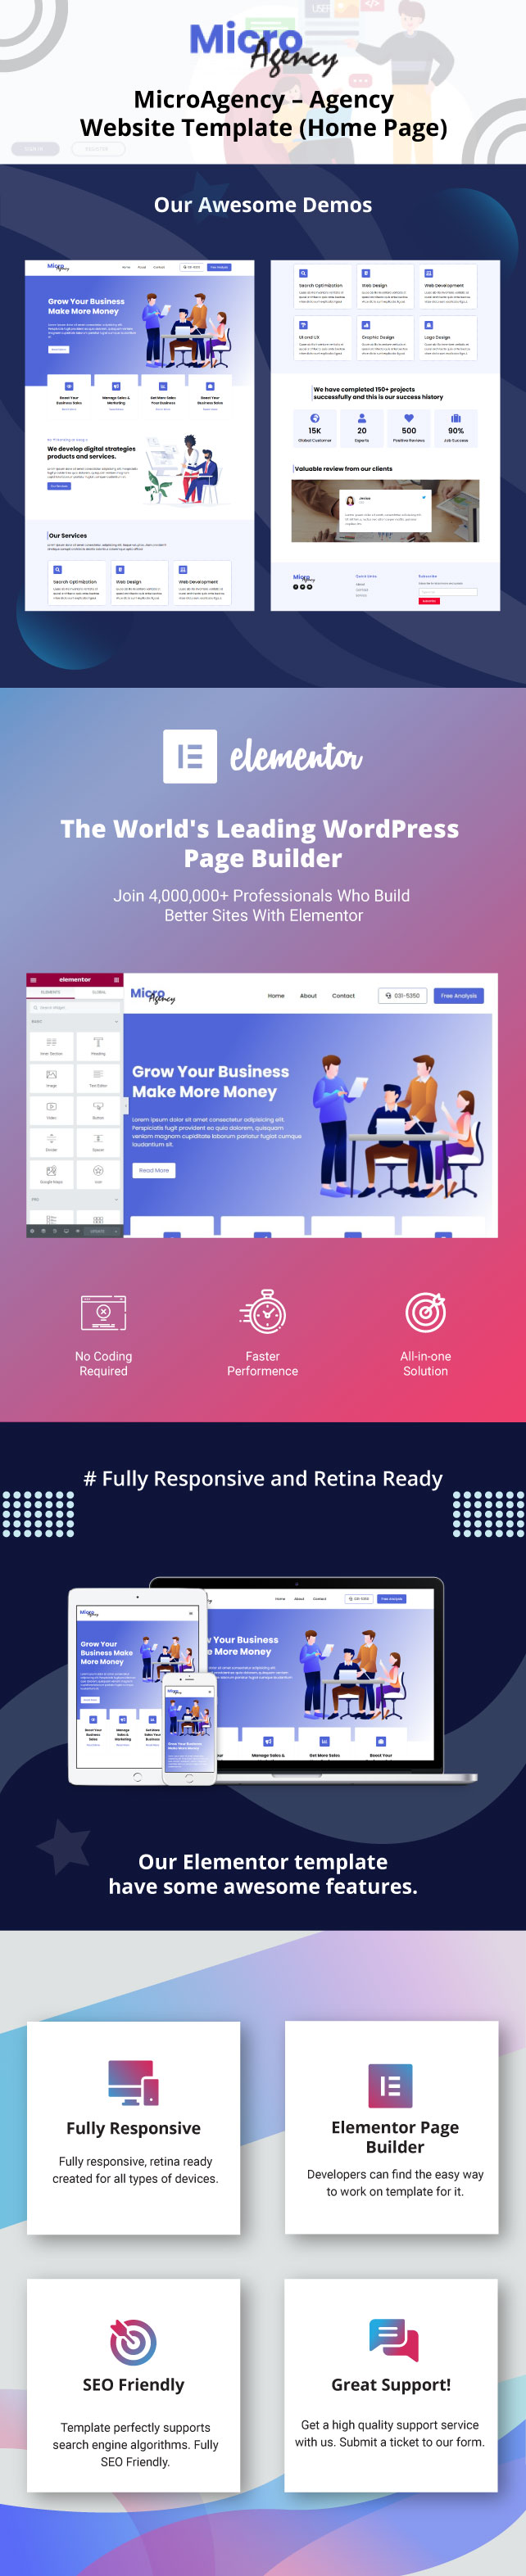 microagency-agency-website-template-home-page